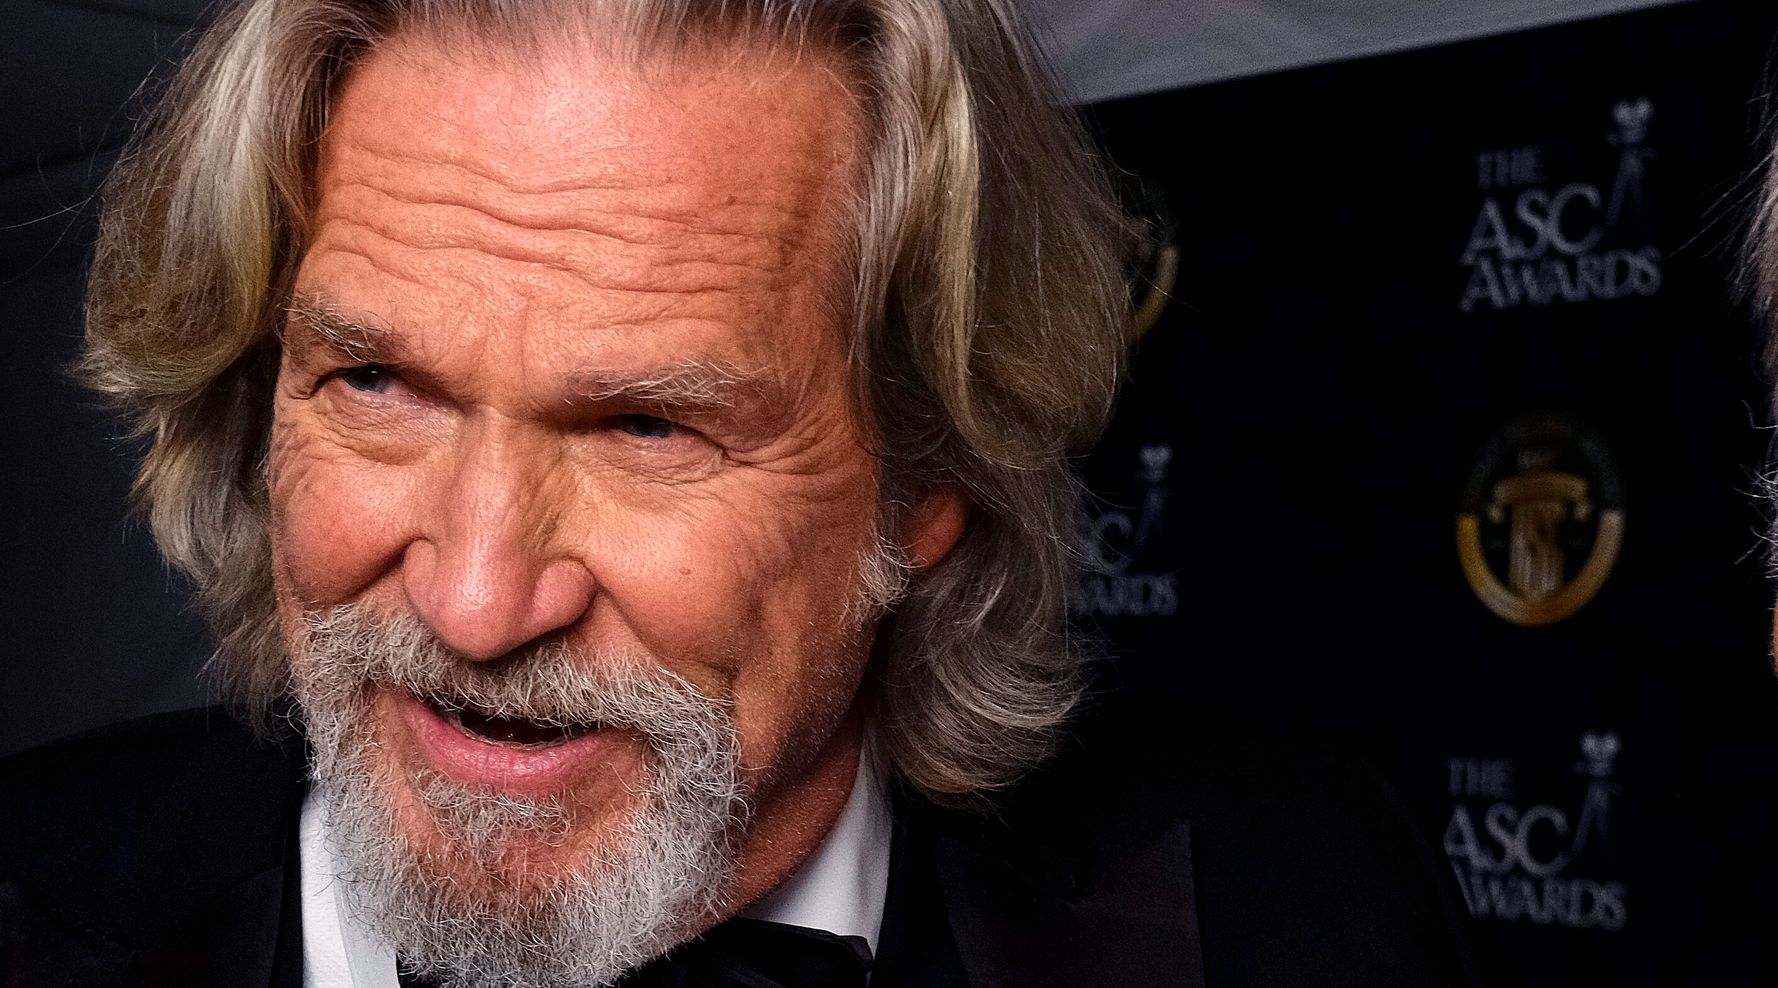 Jeff Bridges Says His Case Of COVID-19 Made Cancer 'Look Like A Piece Of Cake'